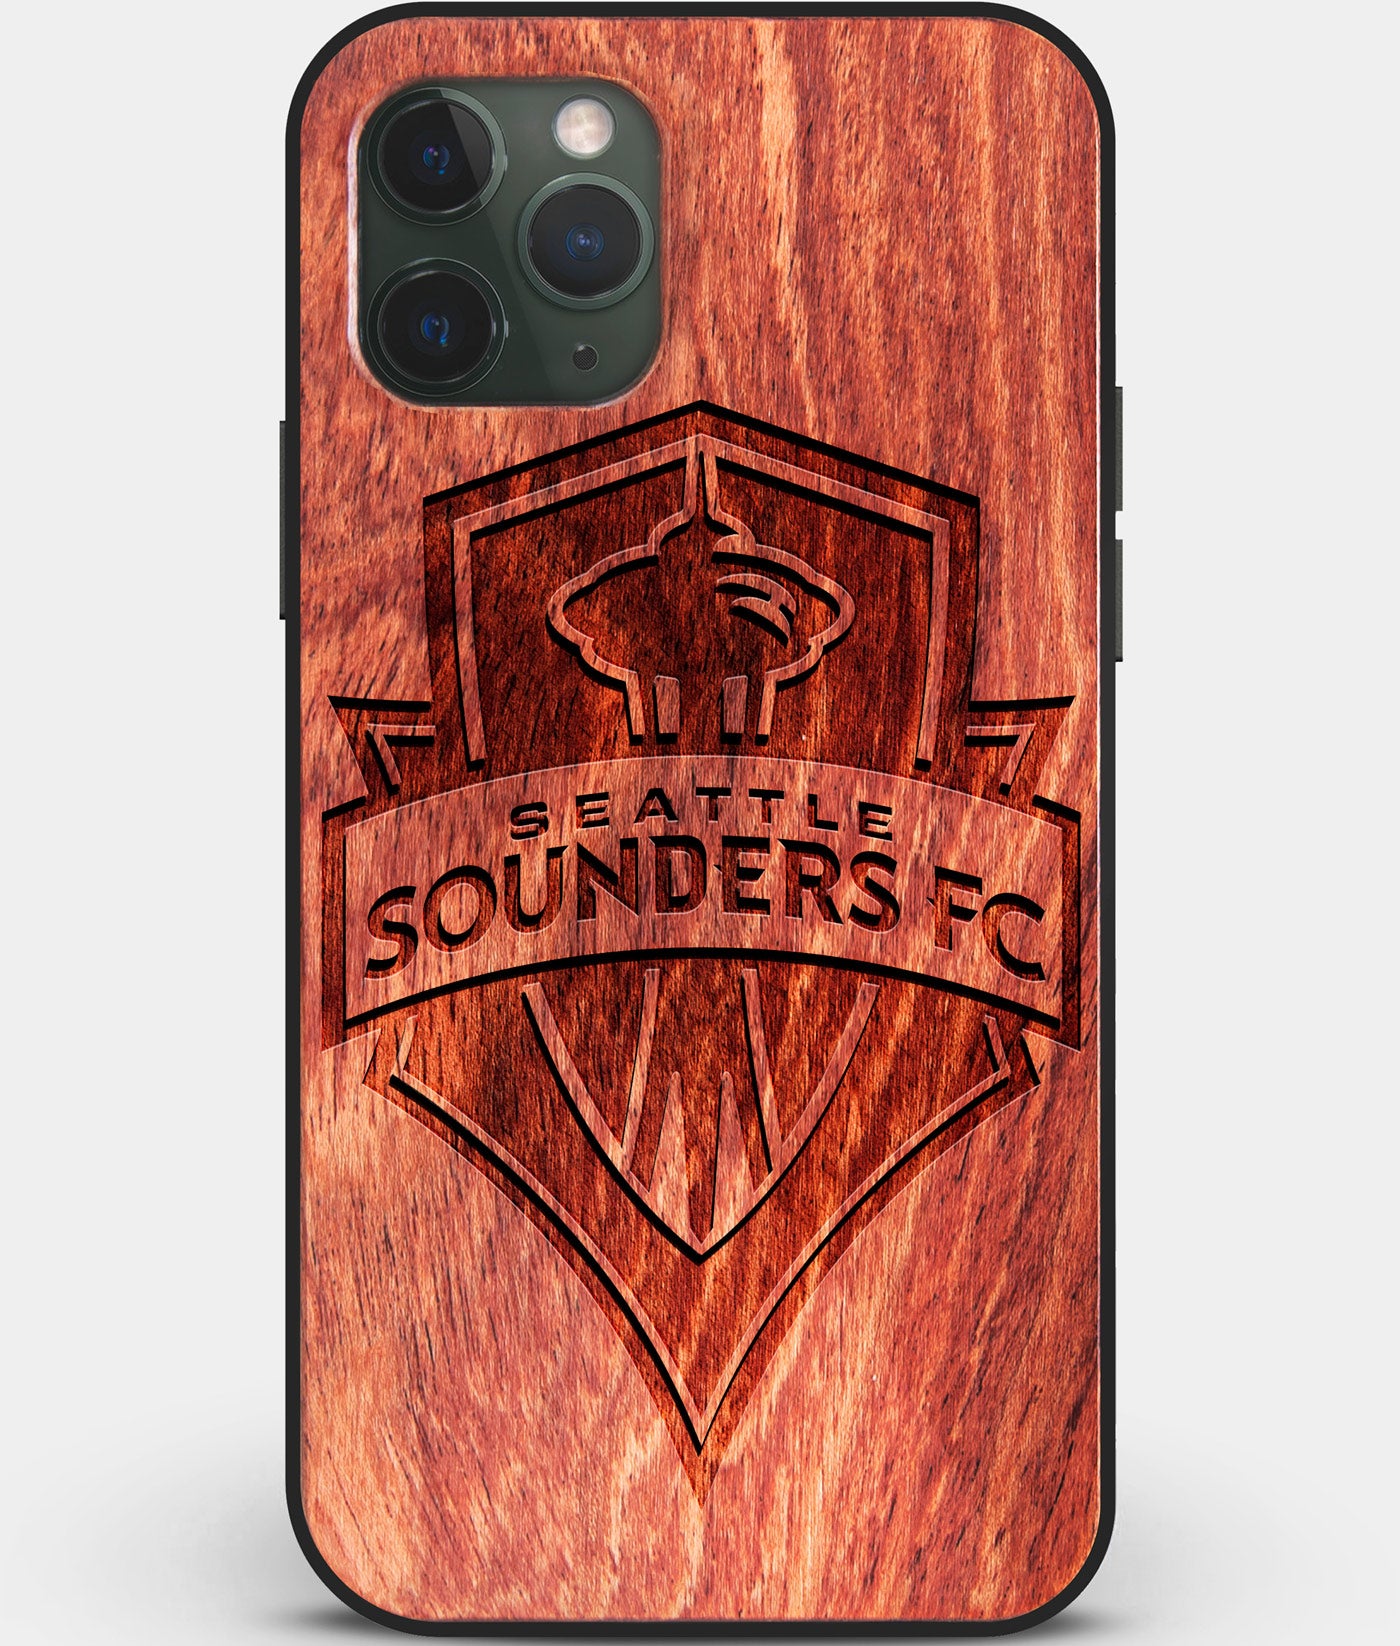 Custom Carved Wood Seattle Sounders FC iPhone 11 Pro Max Case | Personalized Mahogany Wood Seattle Sounders FC Cover, Birthday Gift, Gifts For Him, Monogrammed Gift For Fan | by Engraved In Nature